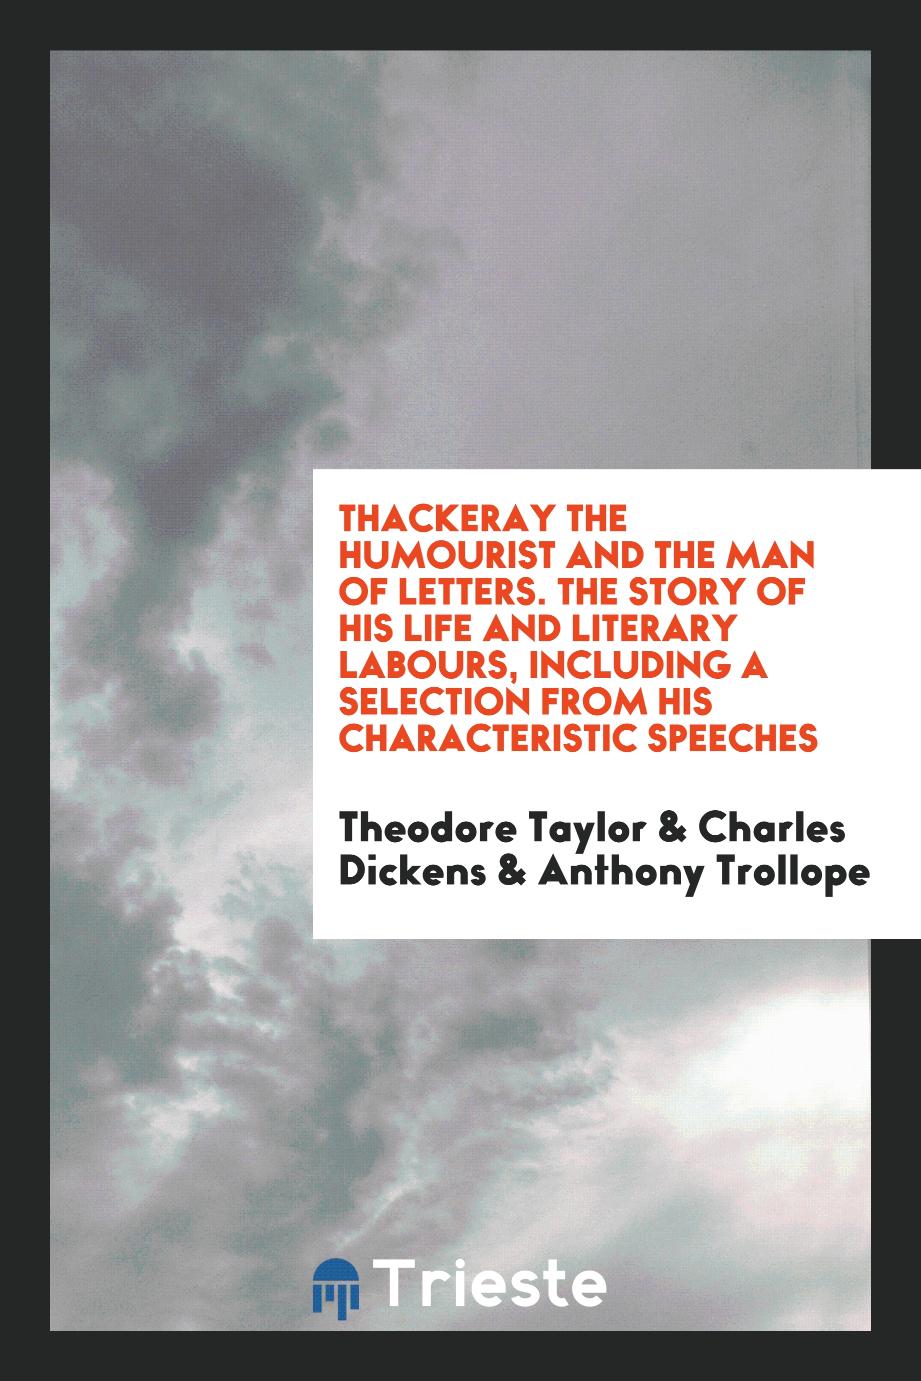 Thackeray the humourist and the man of letters. The story of his life and literary labours, including a selection from his characteristic speeches